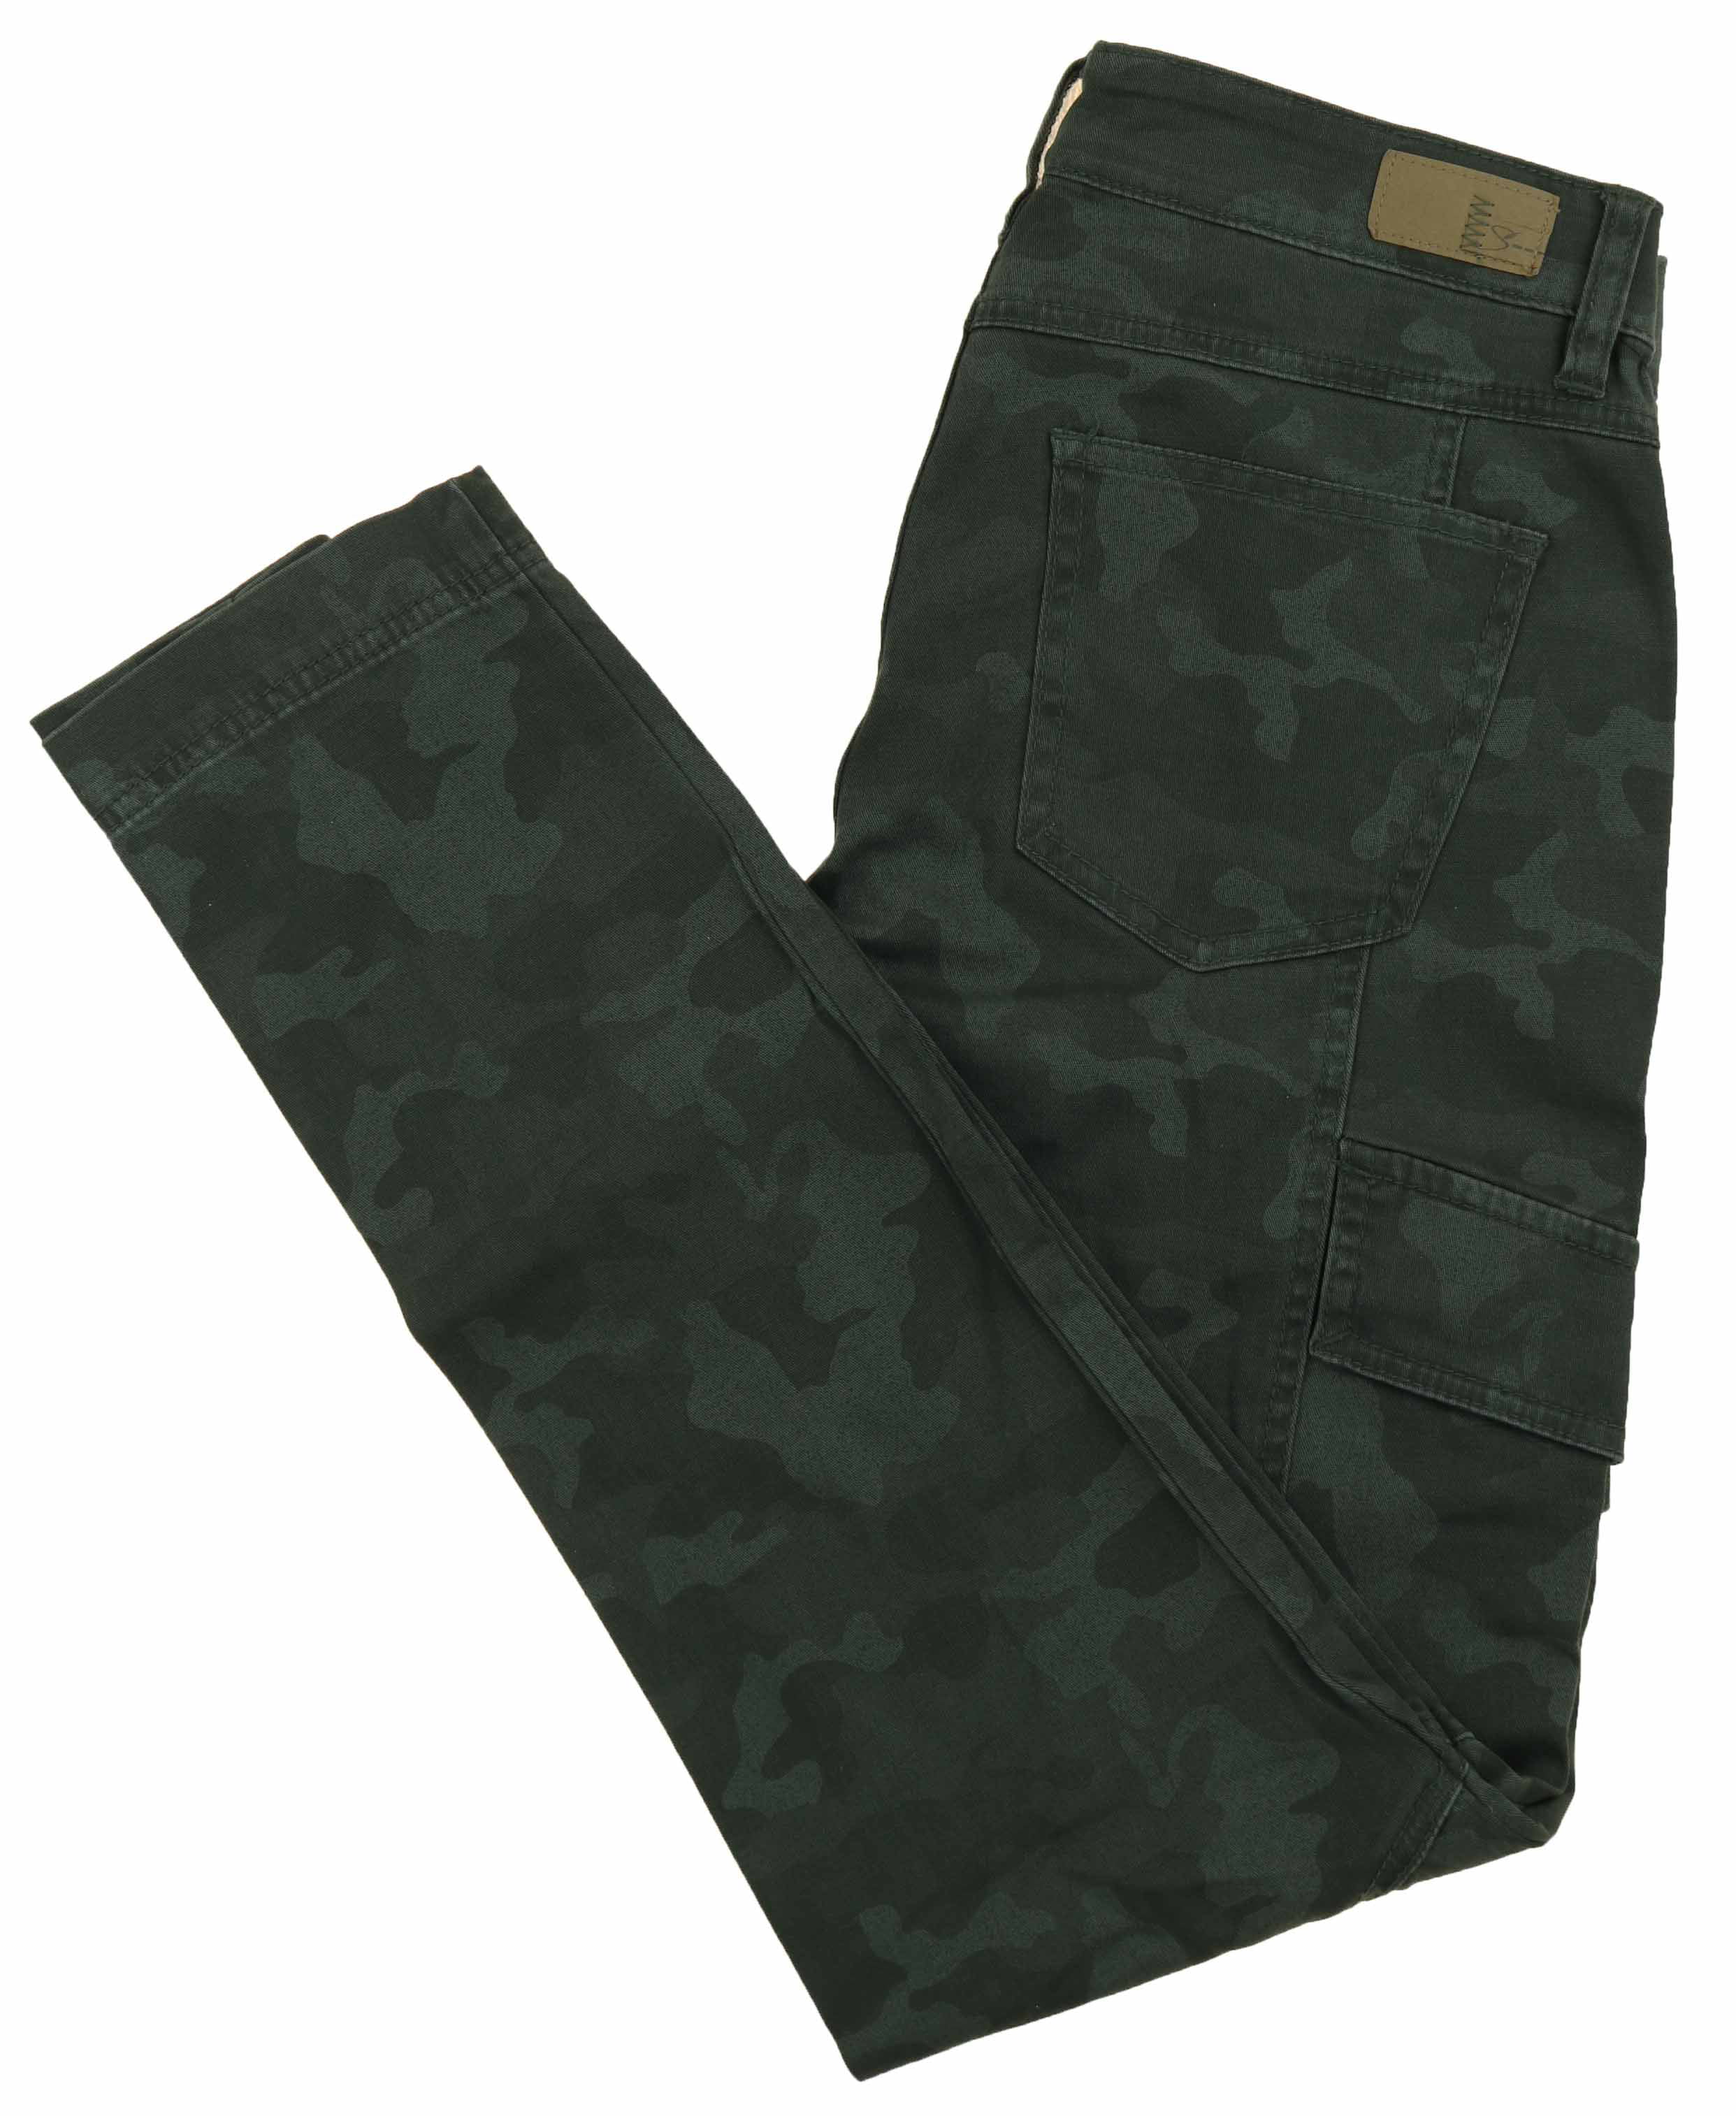 supplies by unionbay camo pants